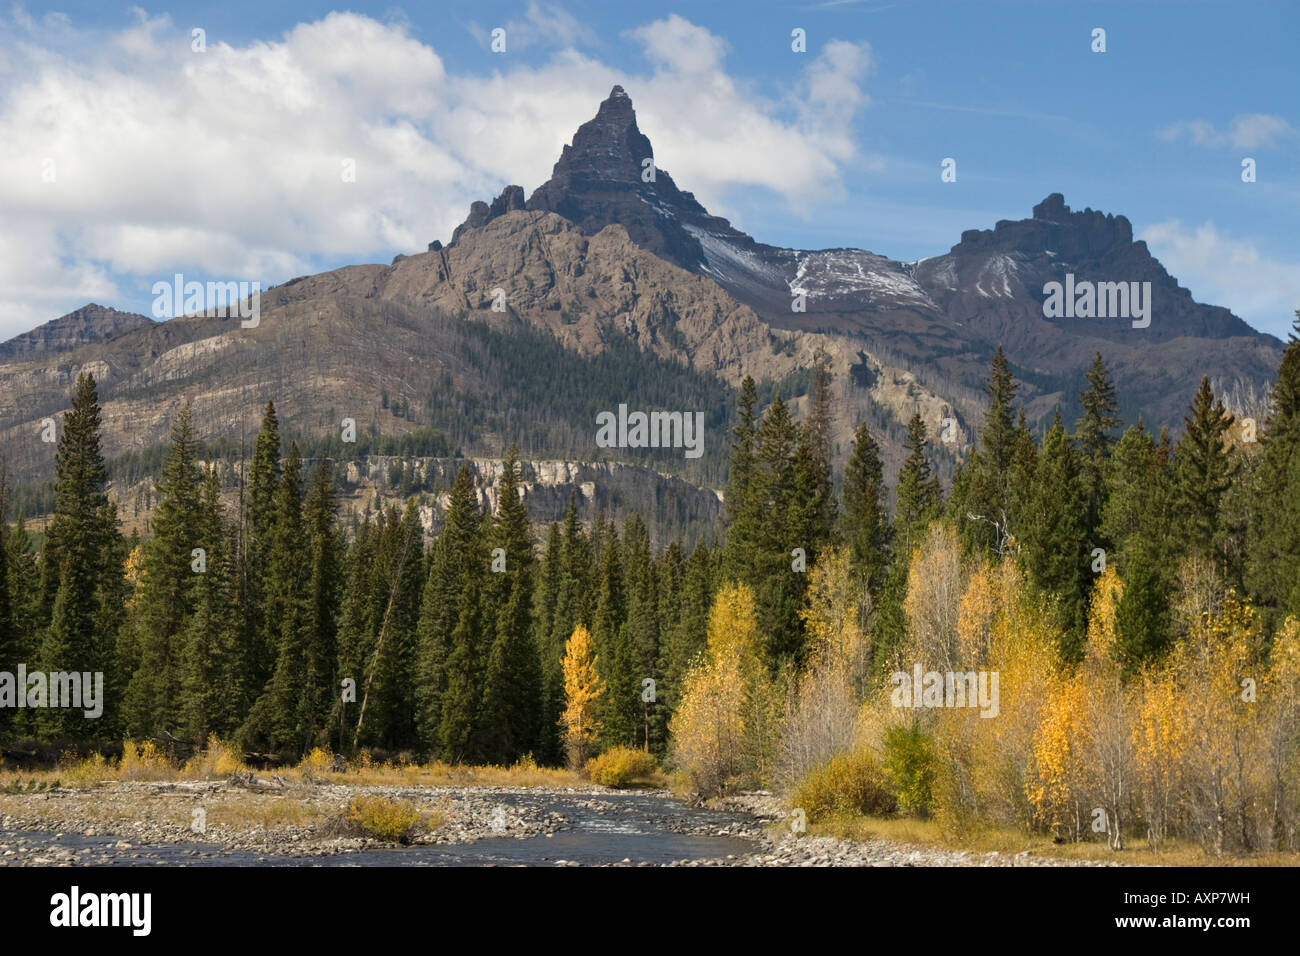 Pilot and Index Peaks tower above the 'Clarks Fork' River Montana Stock Photo